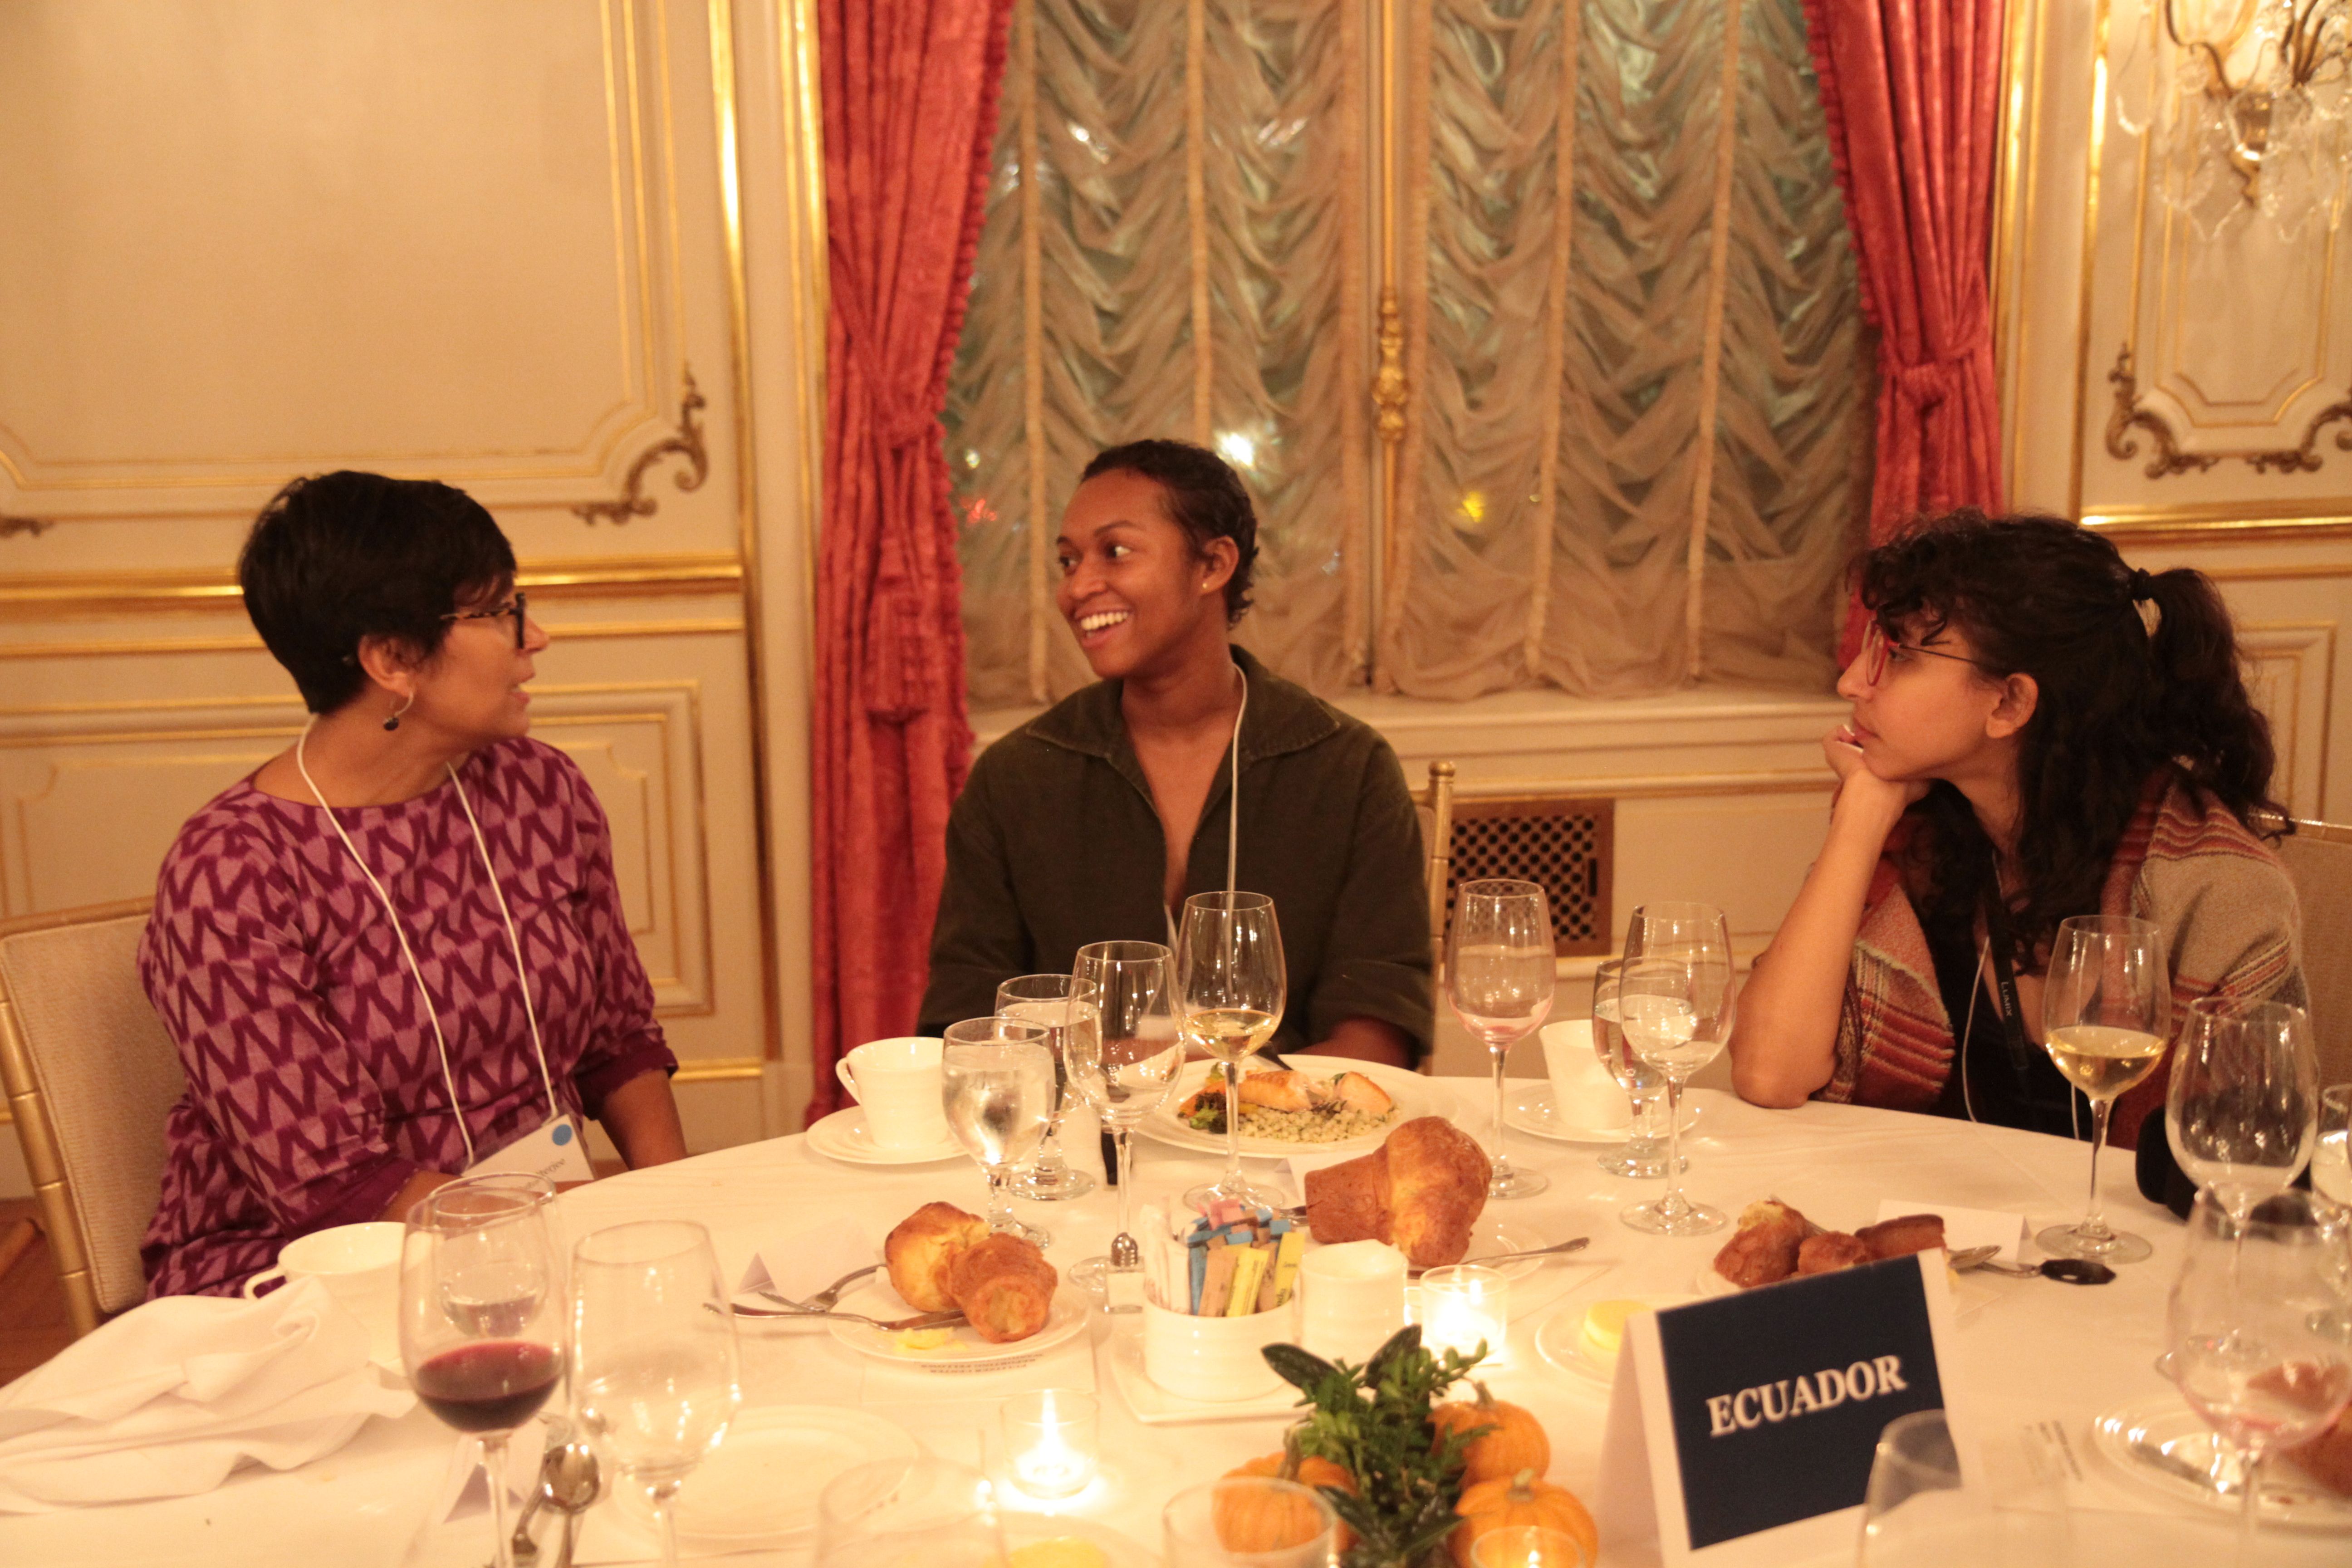 Rhitu Chatterjee, Pulitzer Center grantee, Autumn Harris, Reporting Fellow from Spelman College, and Meerabelle Jesuthasan, education intern at the Pulitzer Center, talk over dinner at the Cosmos Club. Photo by Libby Moeller. United States, 2019. 